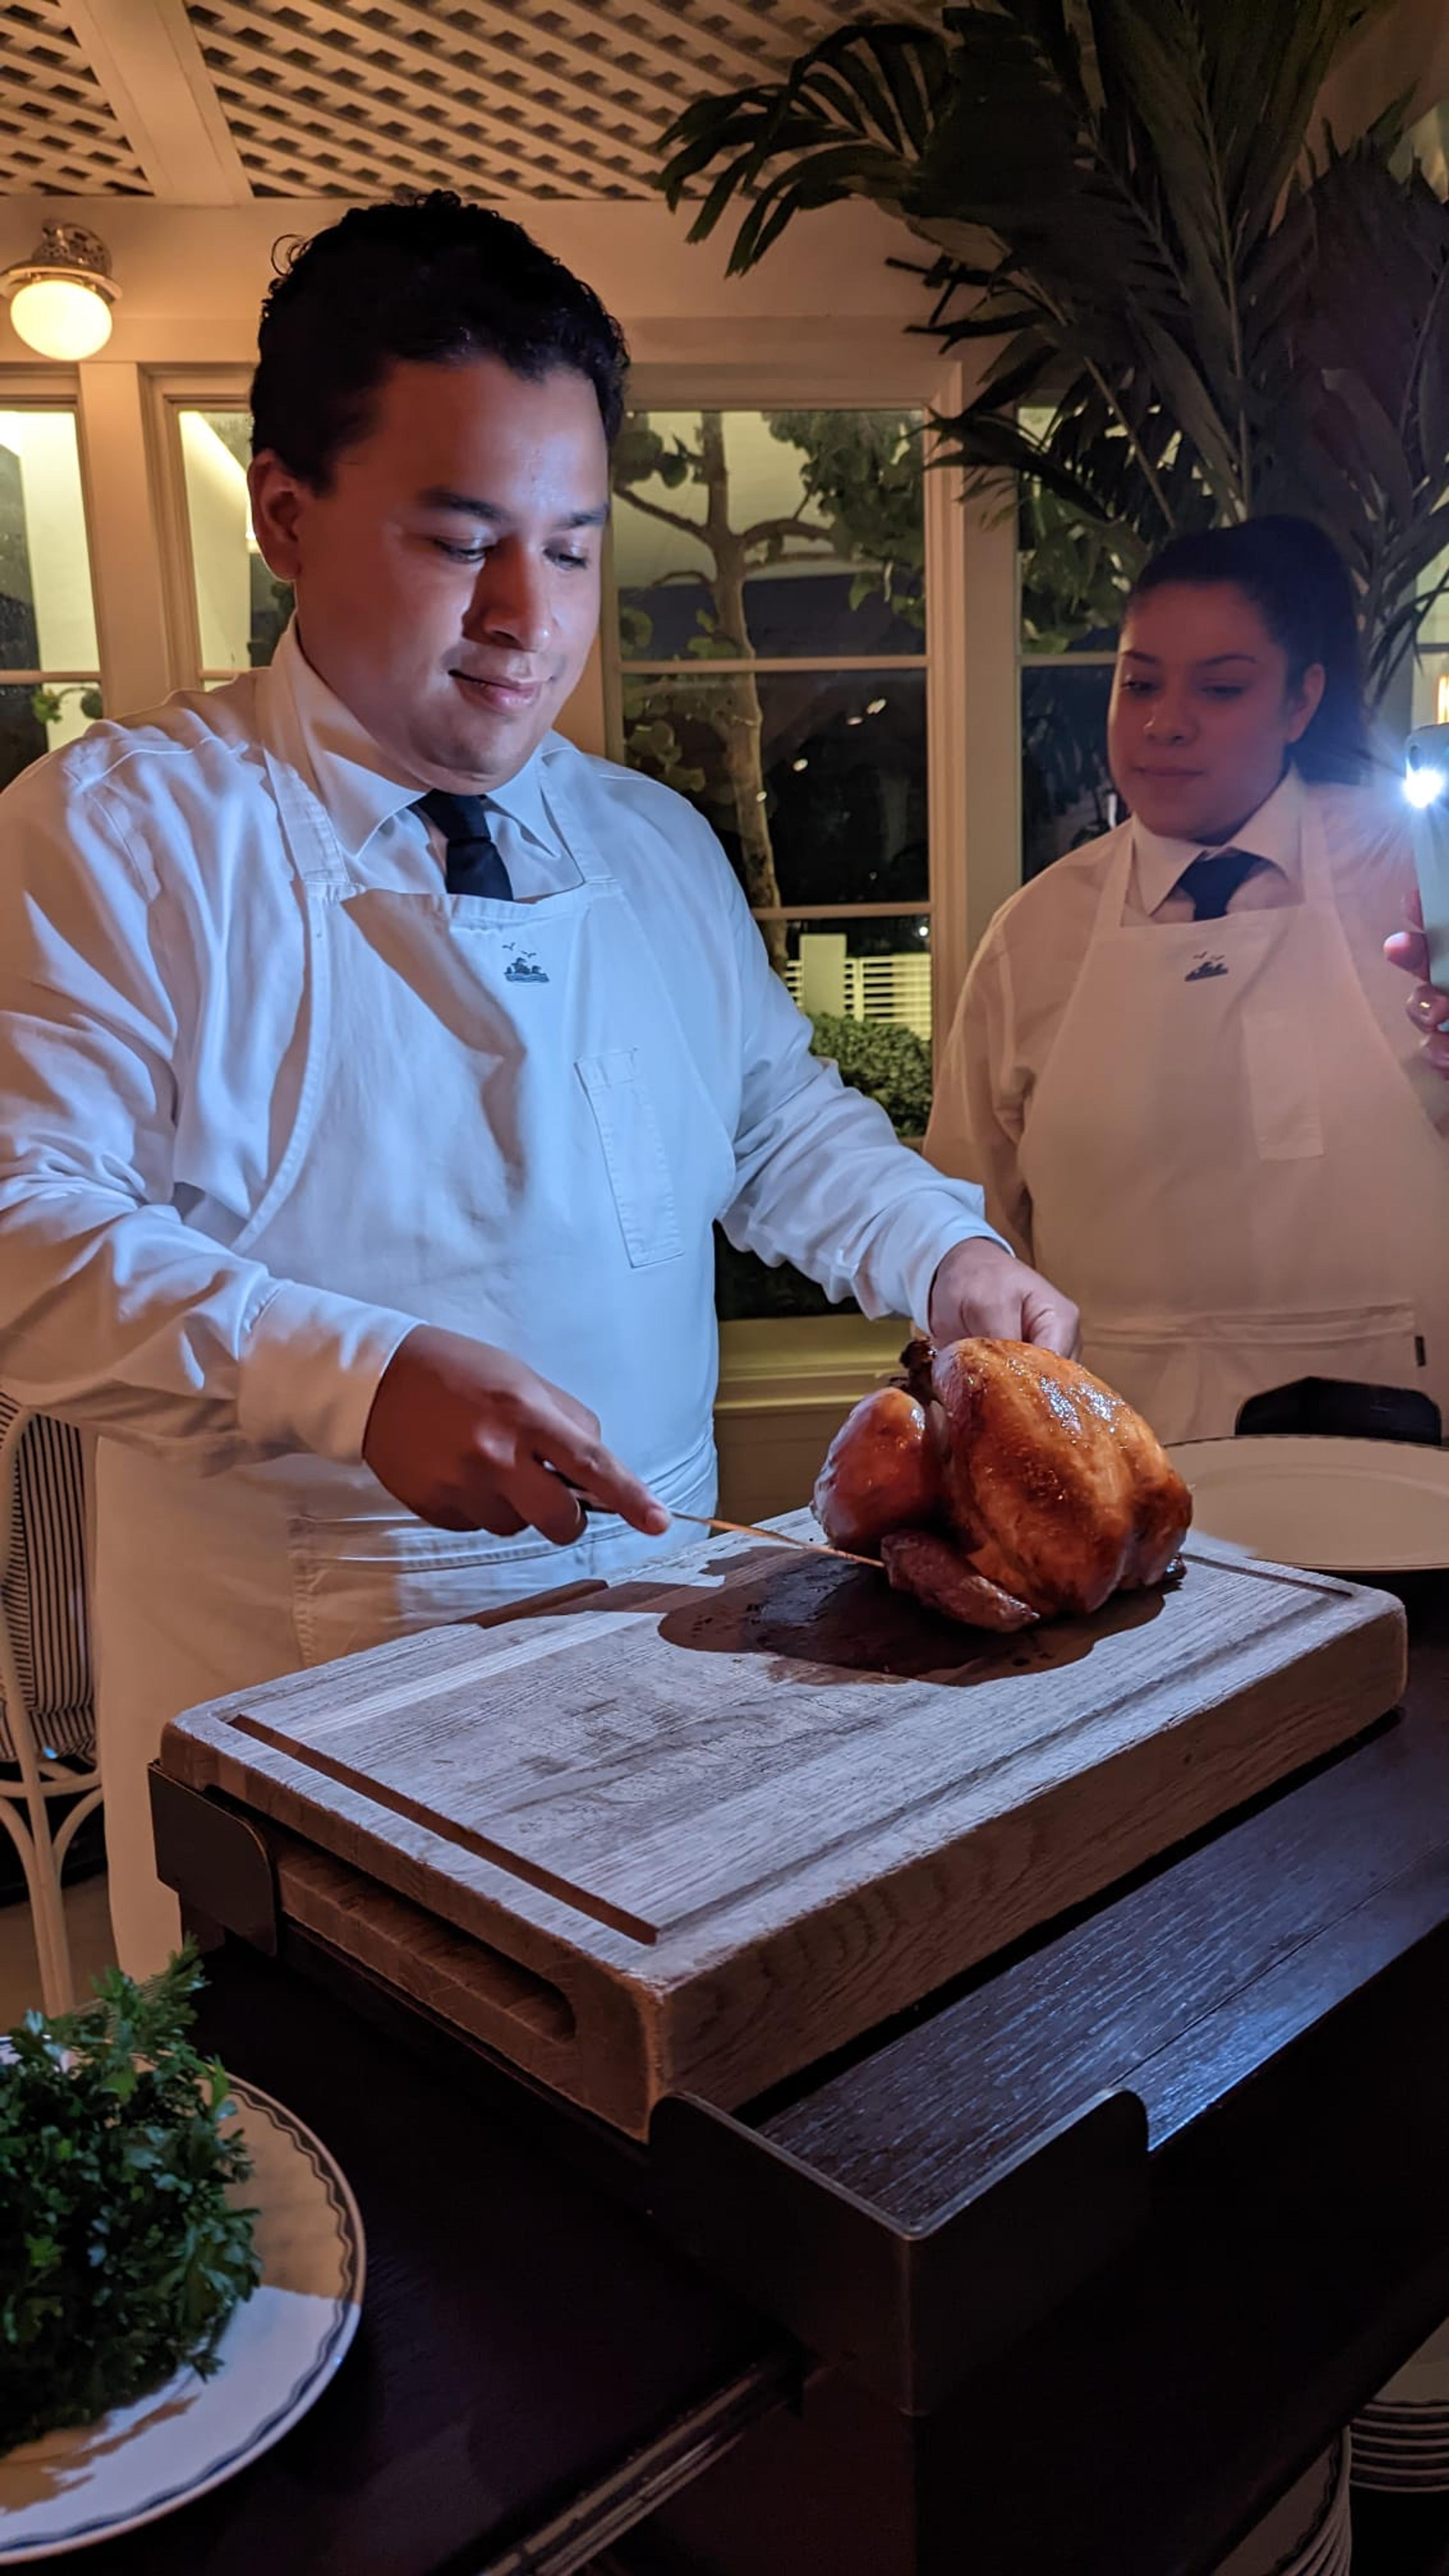 The Caeser salad isn't the only dish prepared tableside!